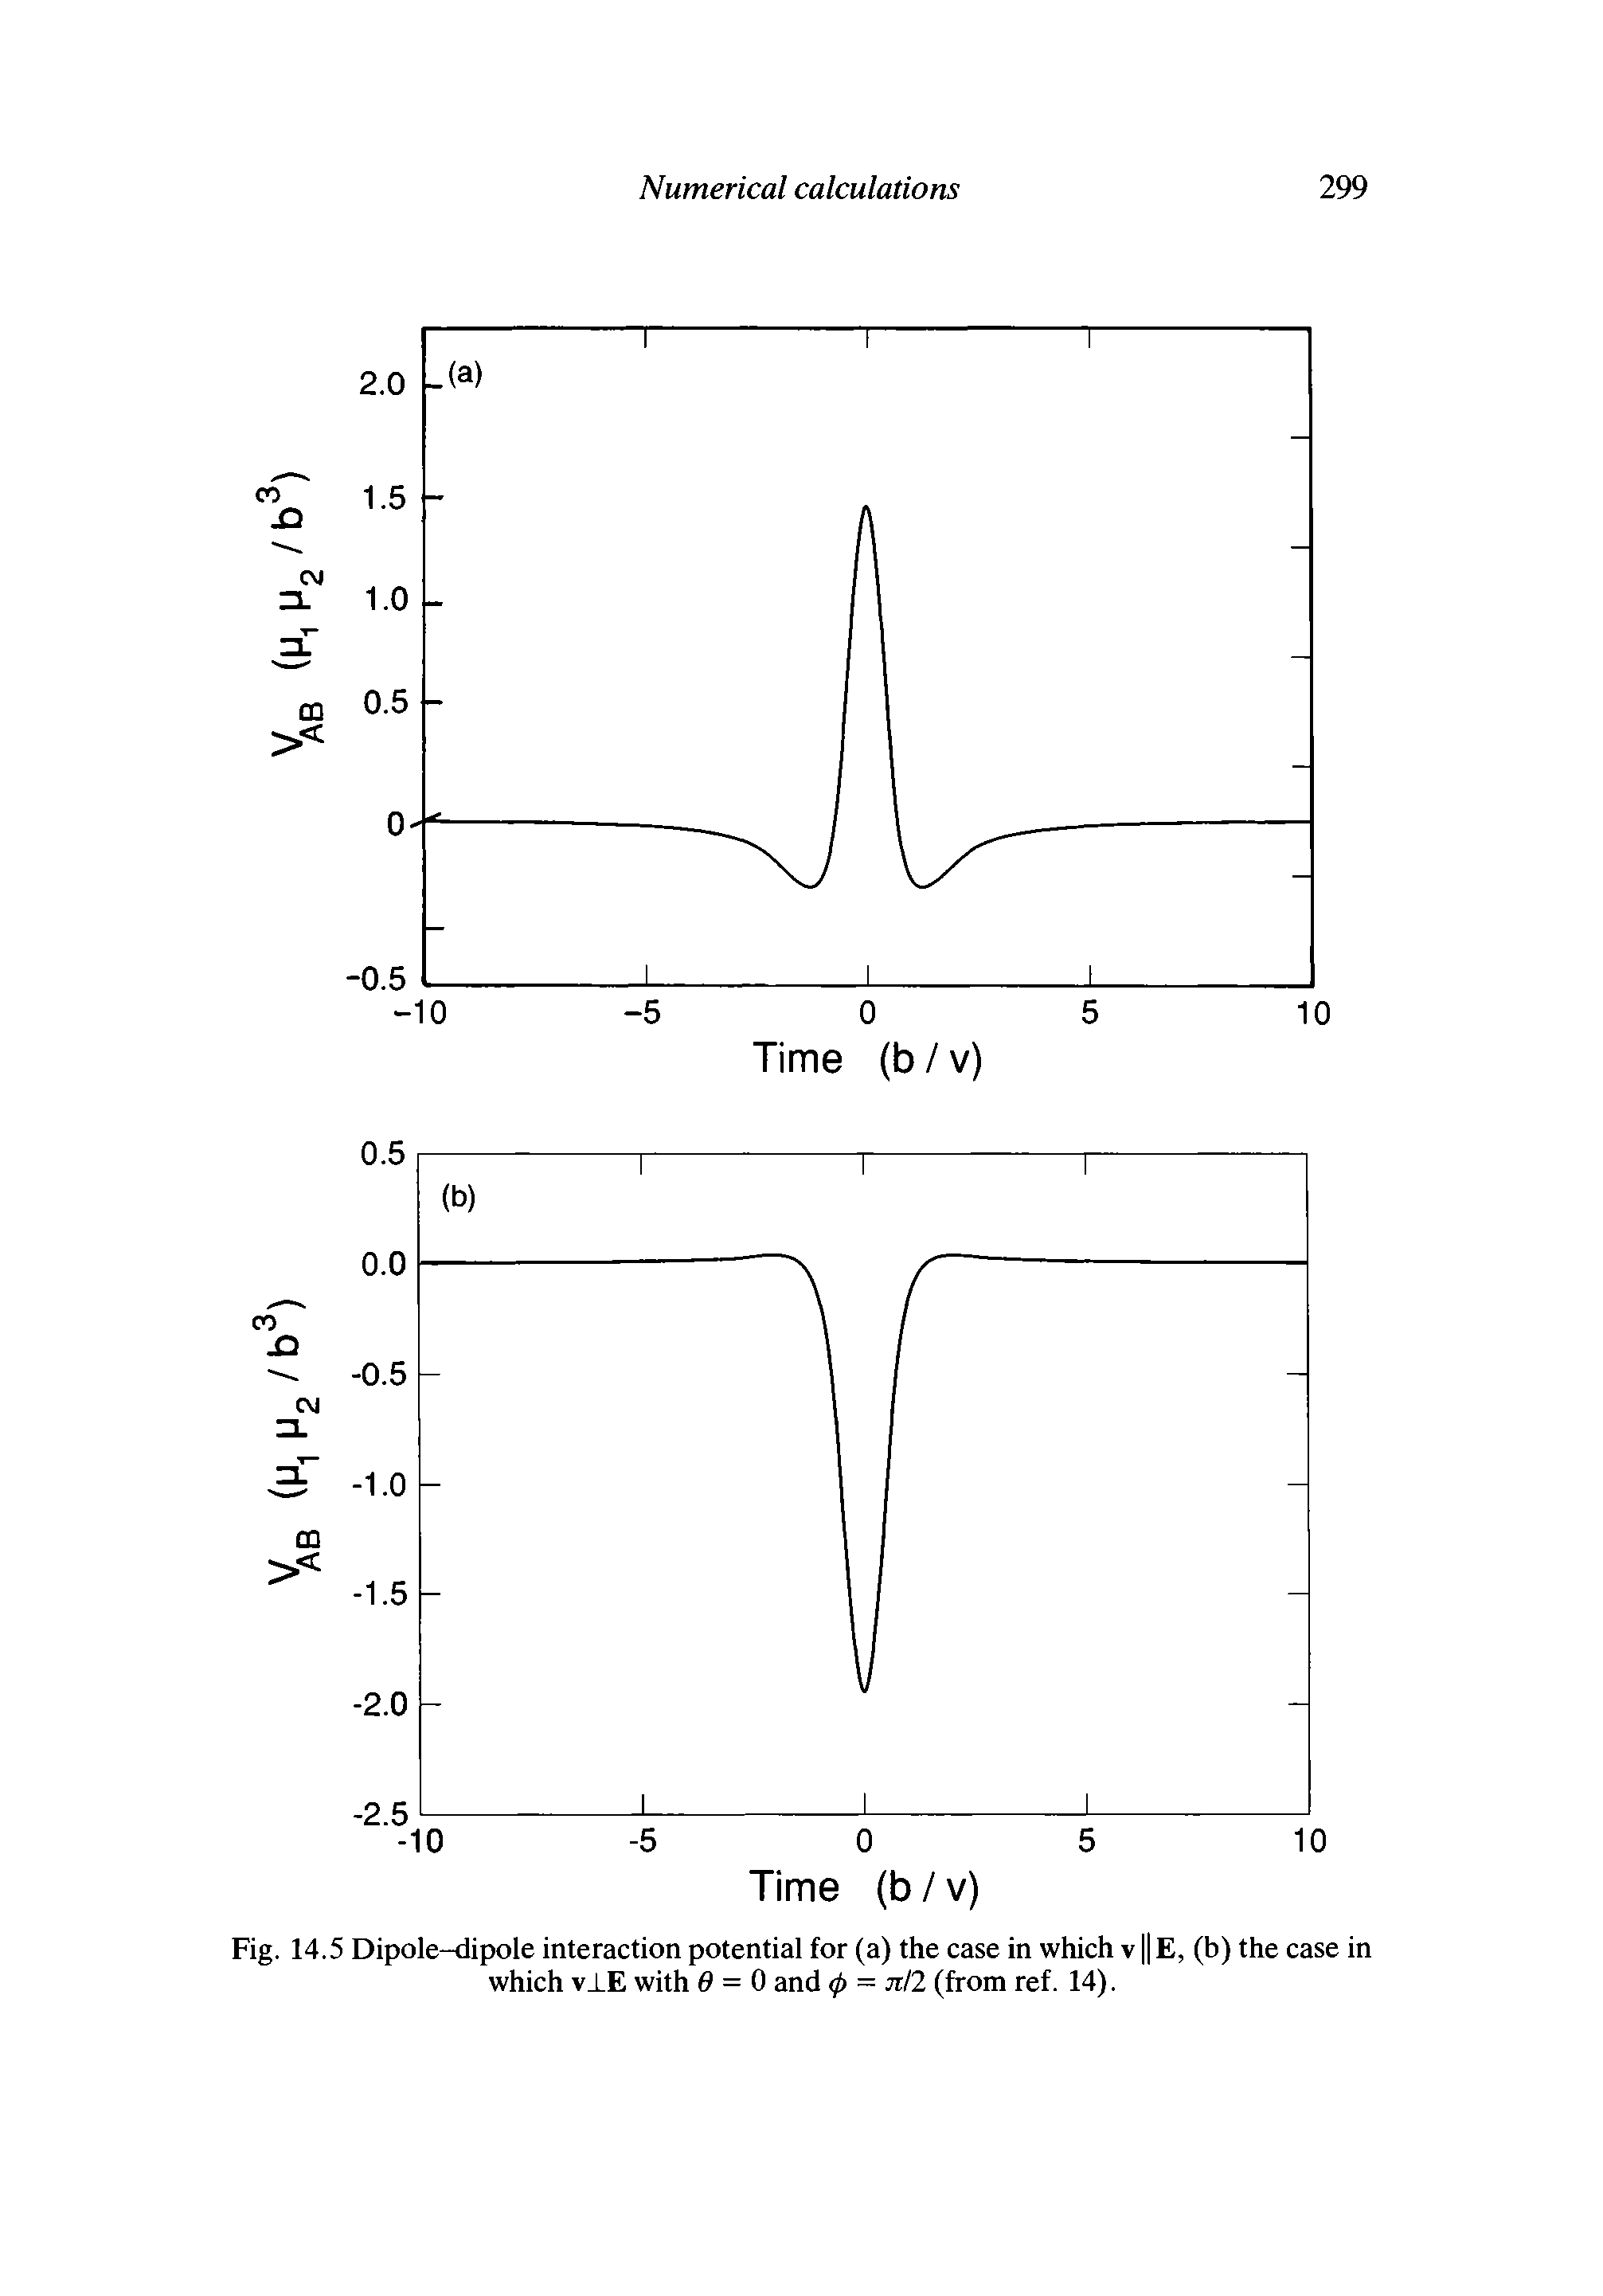 Fig. 14.5 Dipole-dipole interaction potential for (a) the case in which v E, (b) the case in which v LE with 0 = 0 and <f> = jt/2 (from ref. 14).